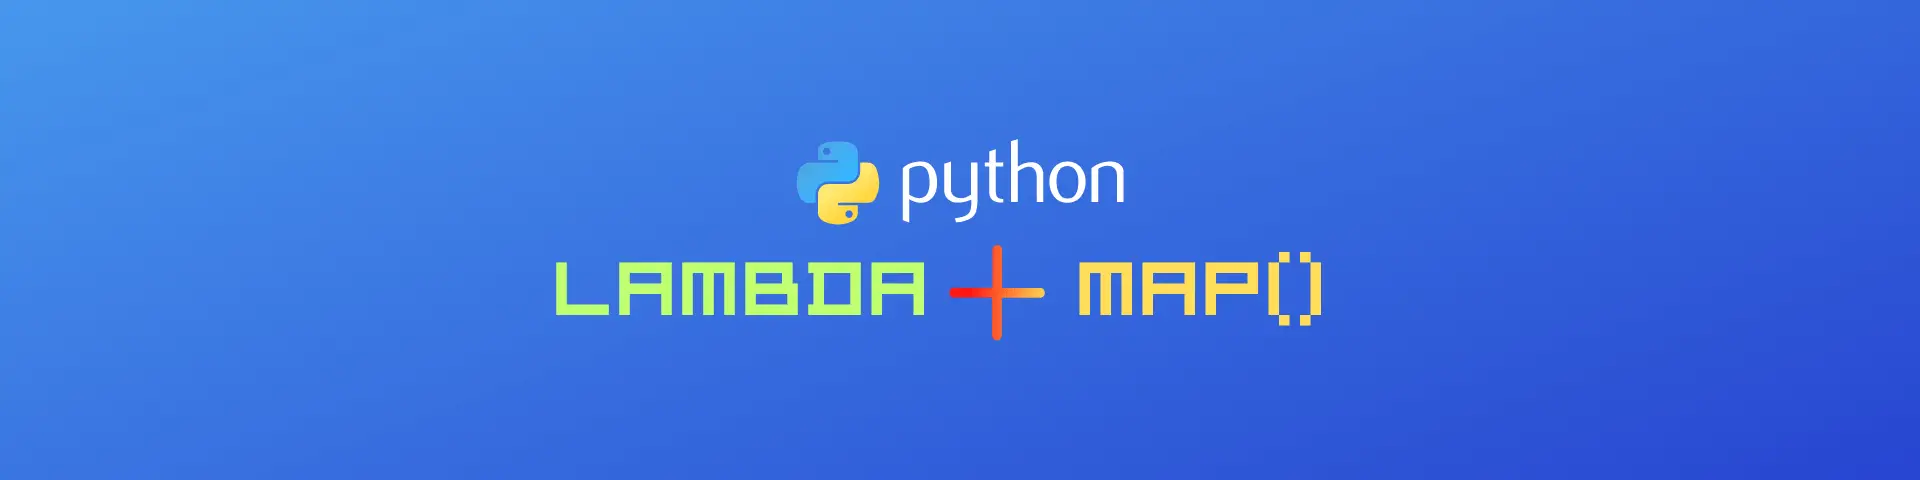 How to Update Every Element in a List Using a Lambda in Python